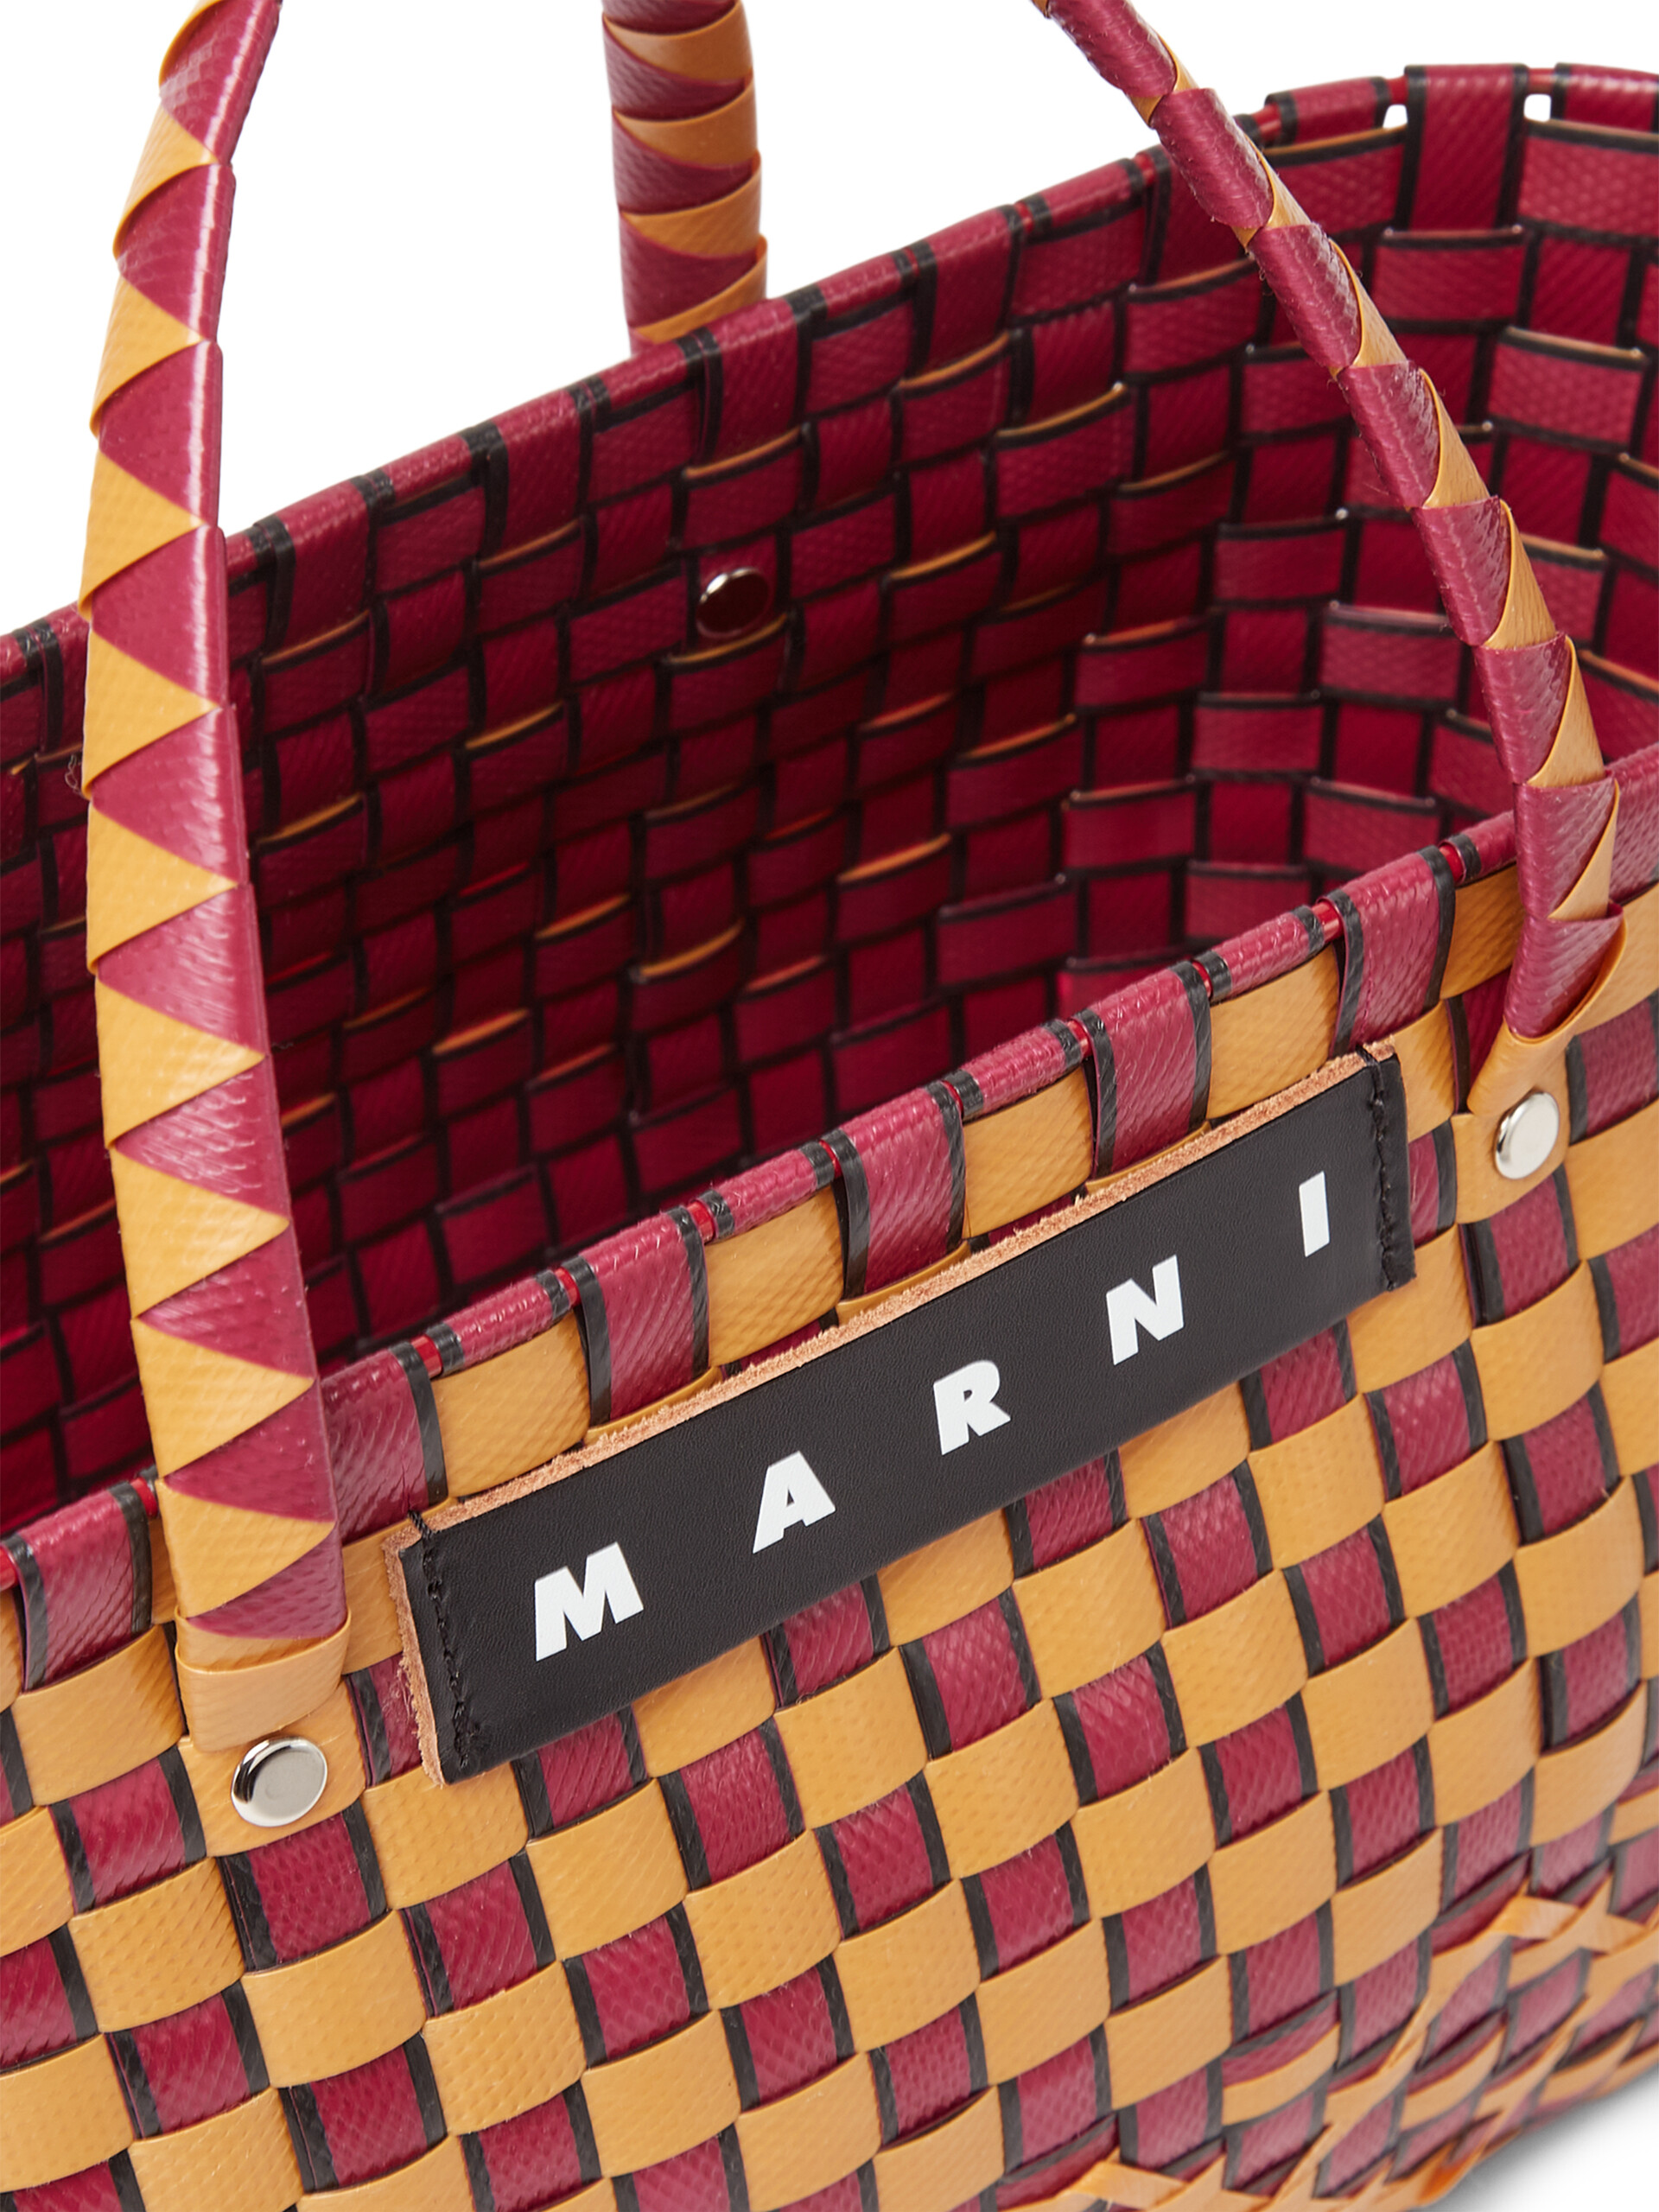 Blue and red woven MARNI MARKET OVAL bag - Shopping Bags - Image 4